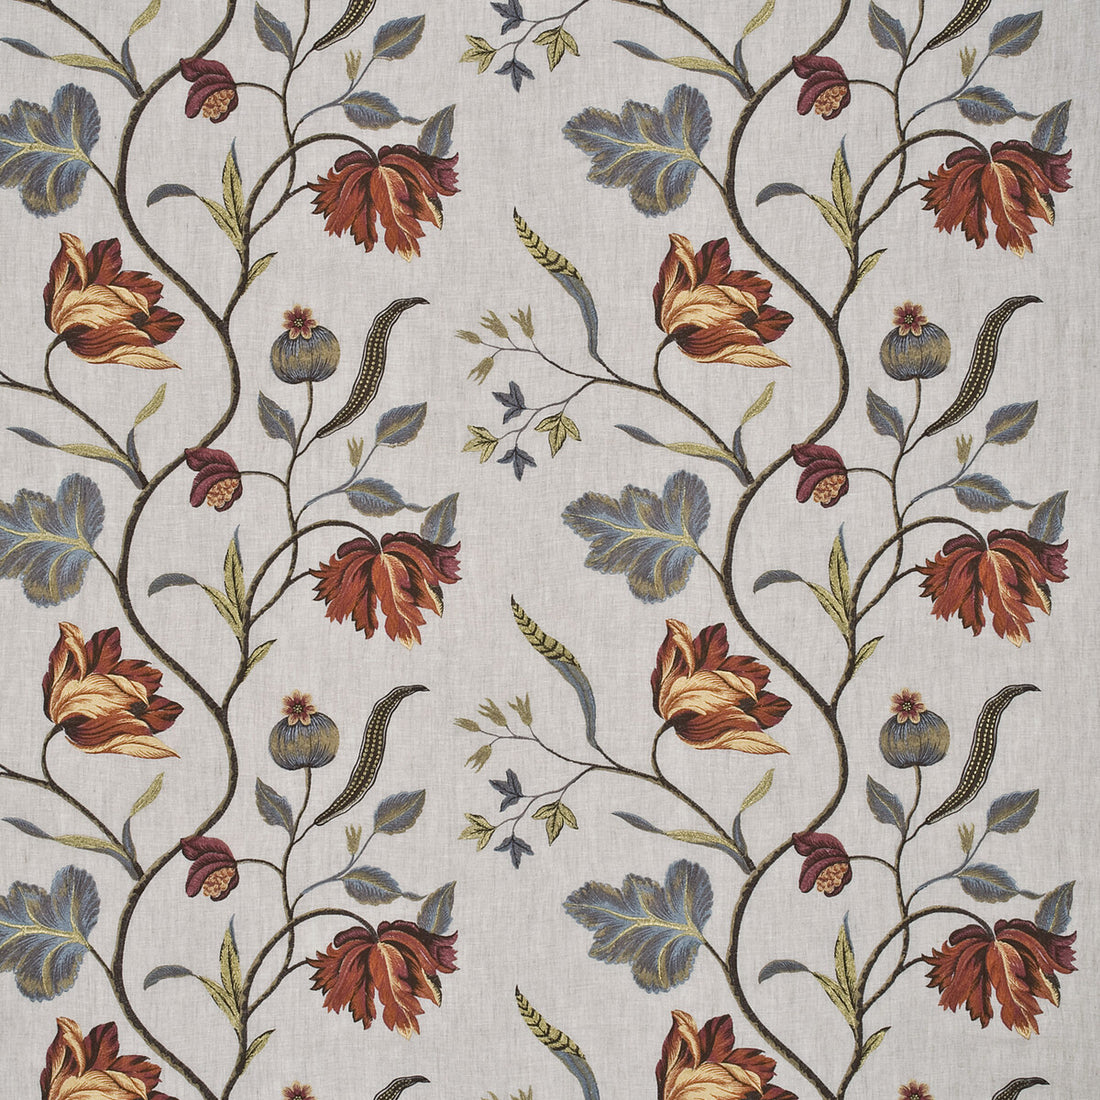 Tulip Tree Linen fabric in pimento color - pattern BF10345.2.0 - by G P &amp; J Baker in the Oleander collection